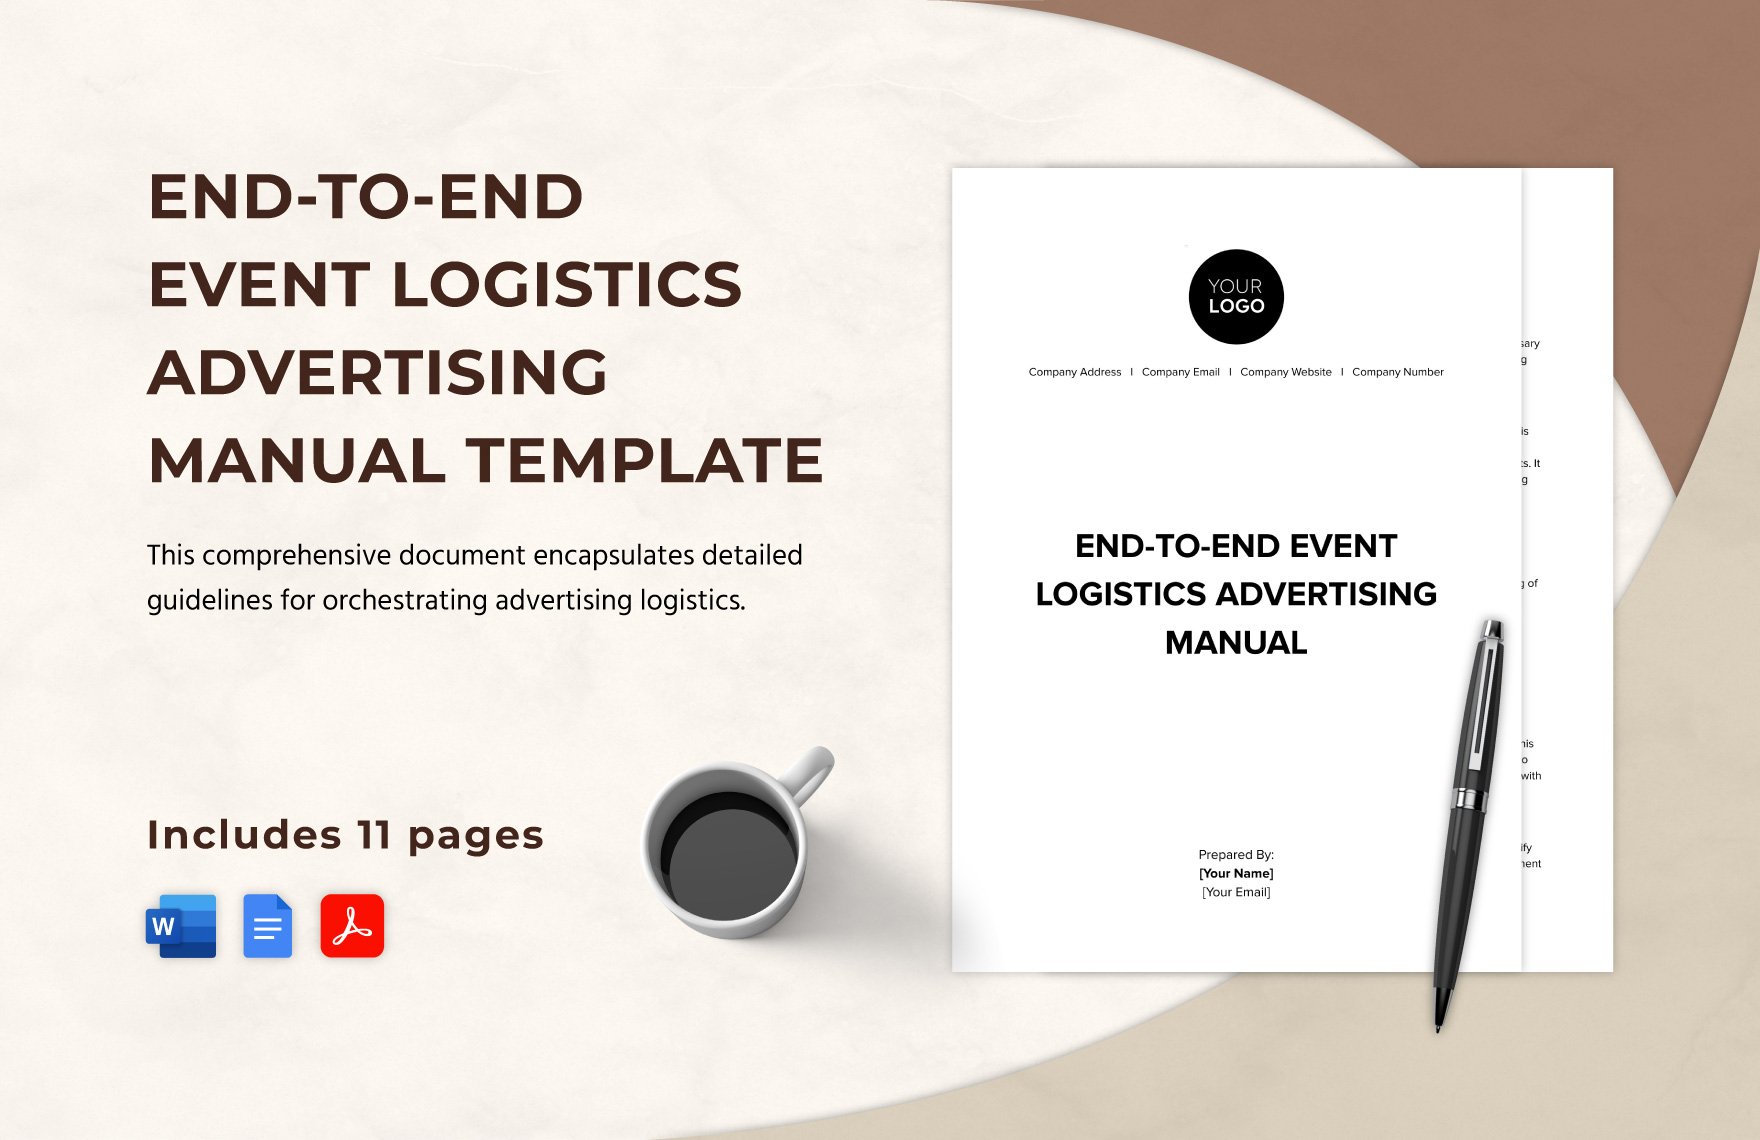 End-to-End Event Logistics Advertising Manual Template in Word, Google Docs, PDF